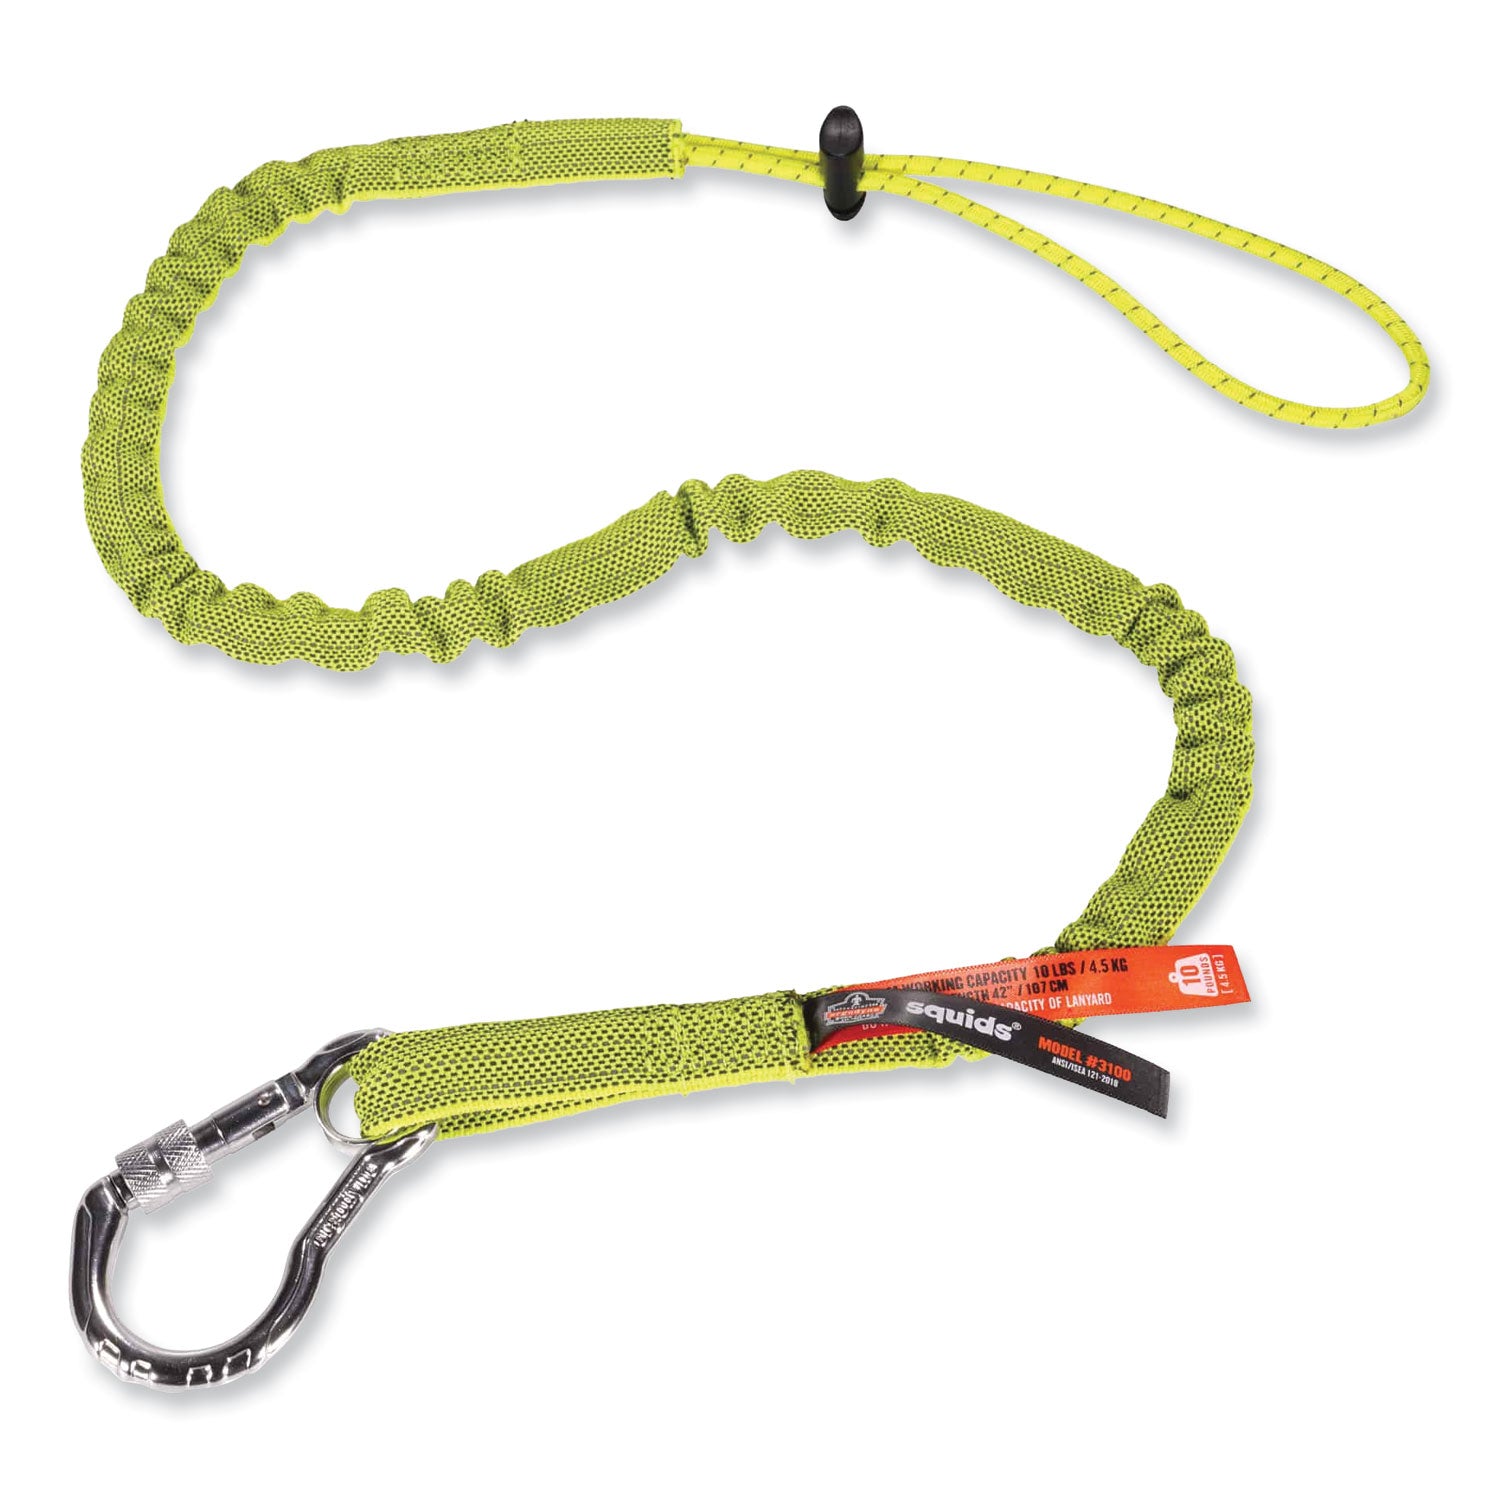 squids-3100-lanyard-w-aluminum-carabiner-+-cinch-loop-10-lb-max-work-capacity-35-to-45-lime-ships-in-1-3-business-days_ego19003 - 1